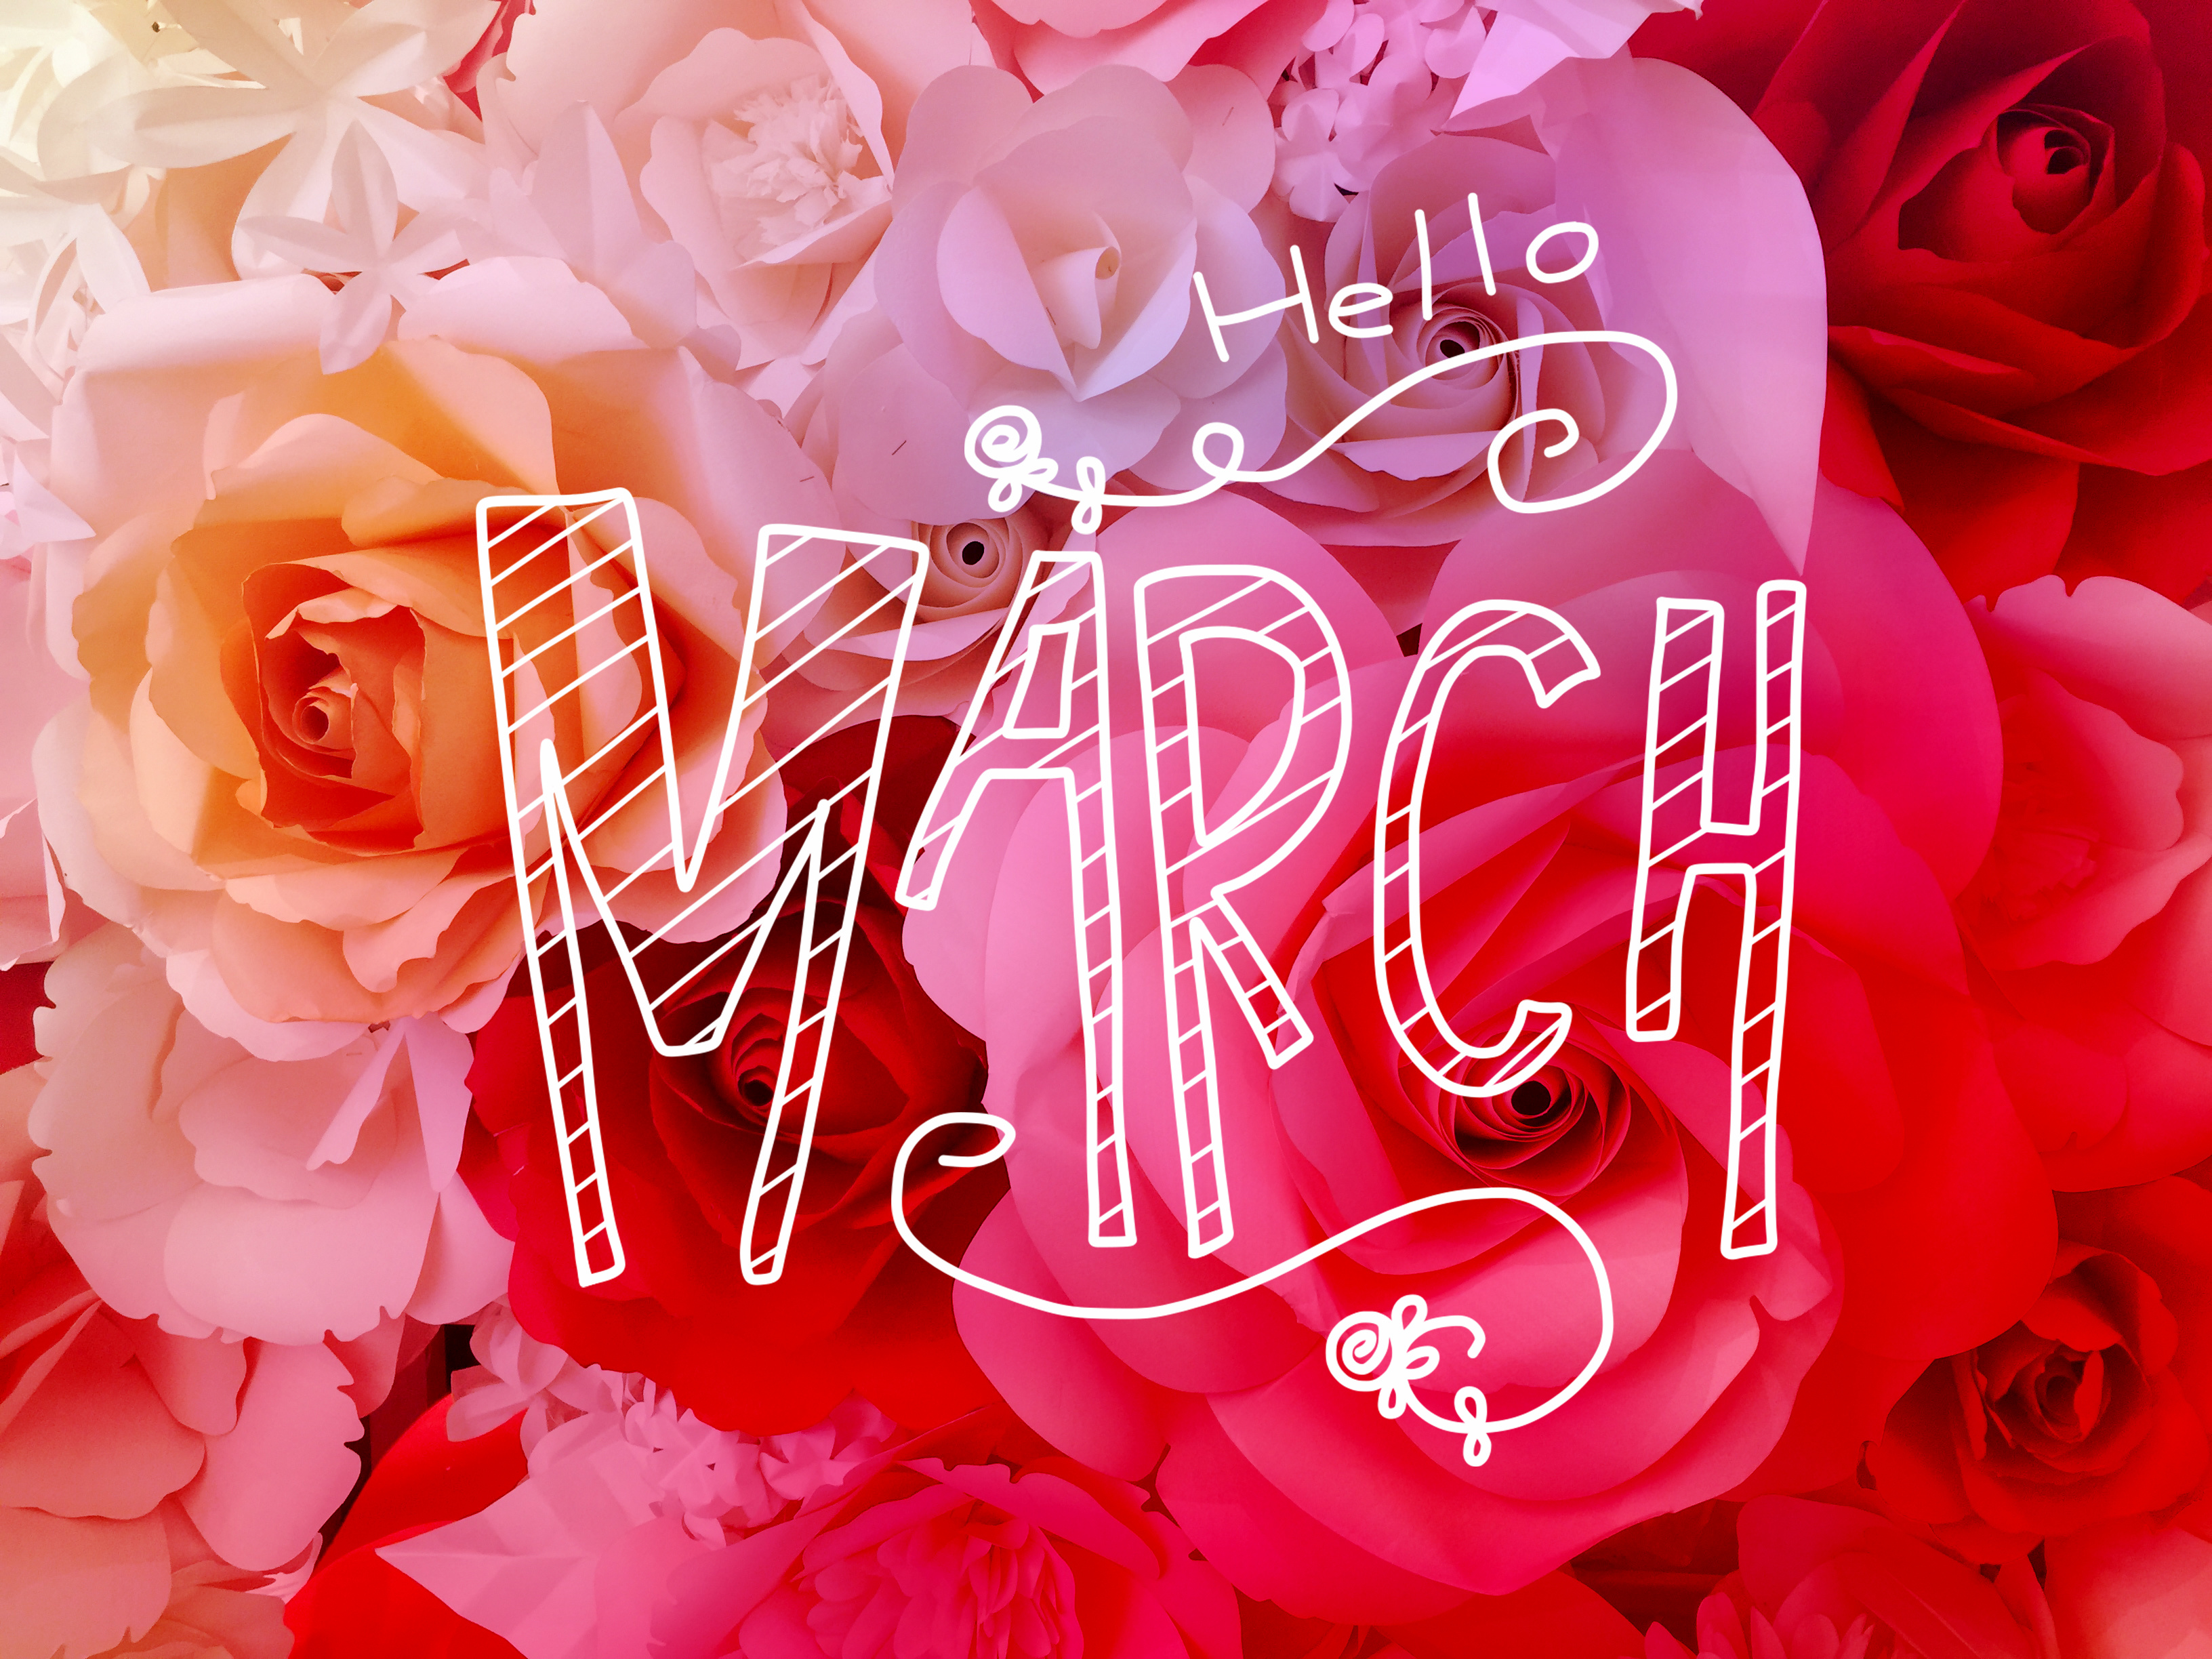 Hello march with background of red flowers 